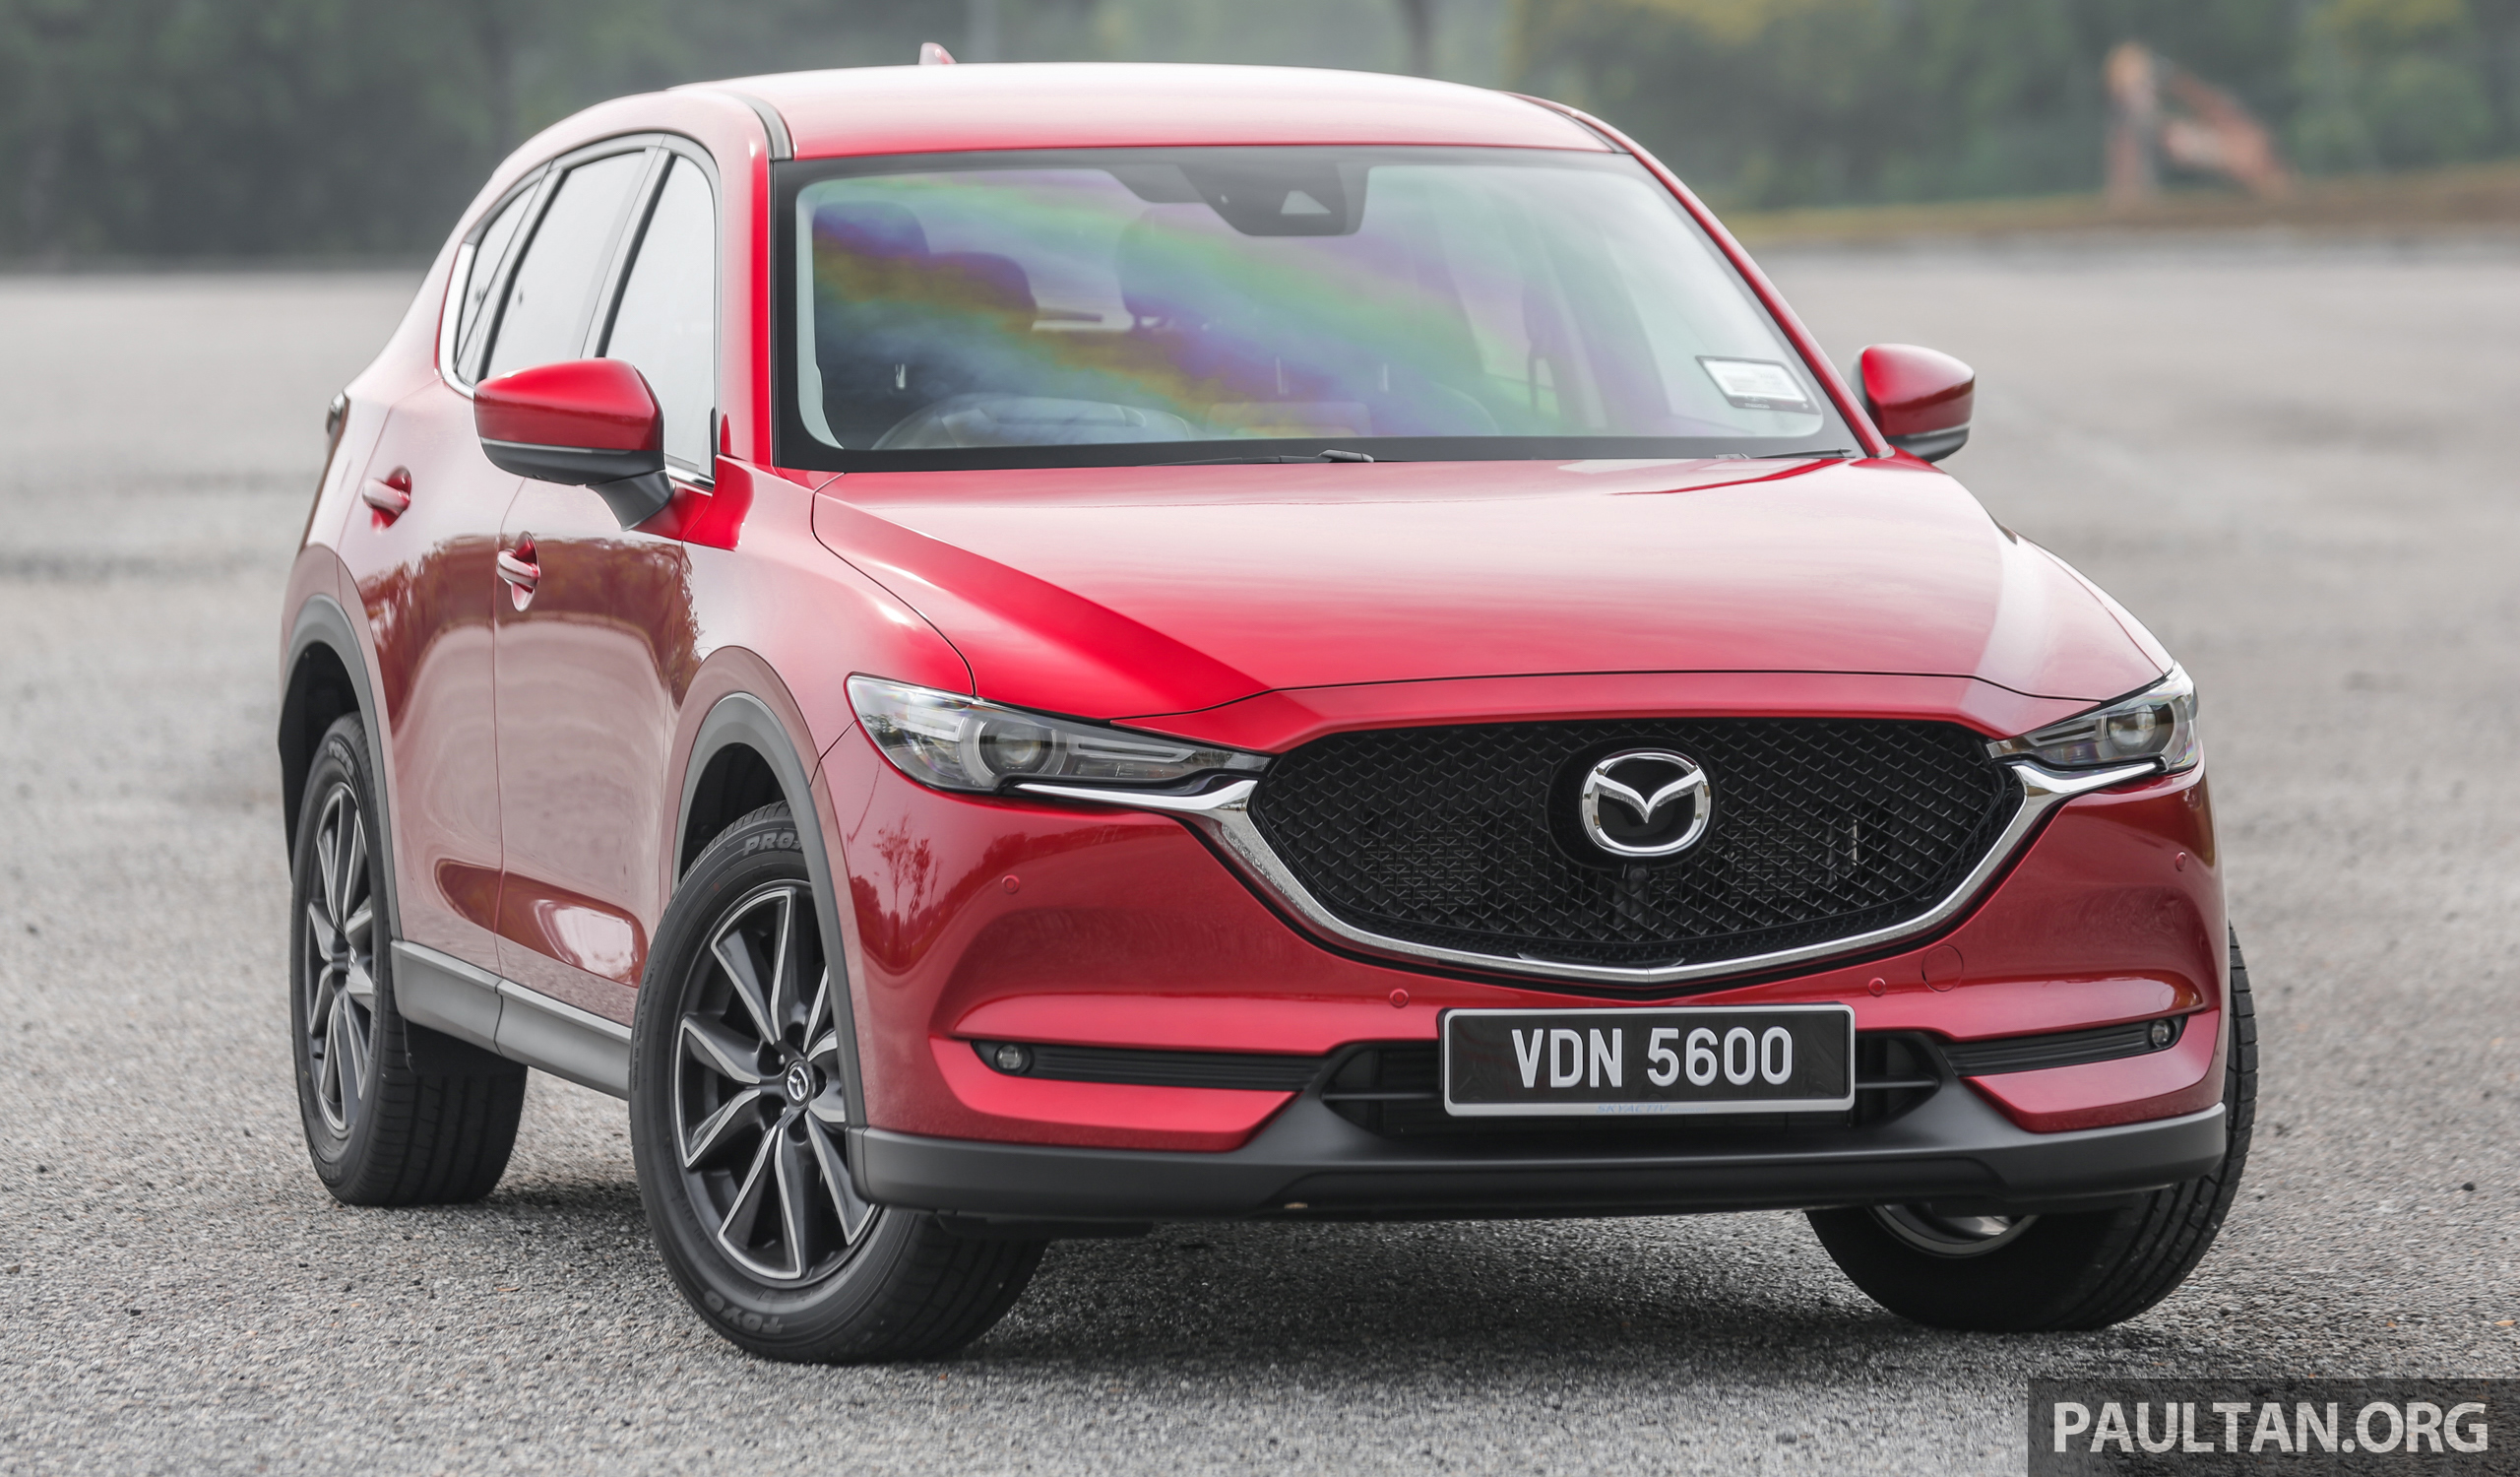 2019 Mazda CX-5 CKD launched in Malaysia - five variants, new 2.5 Turbo ...